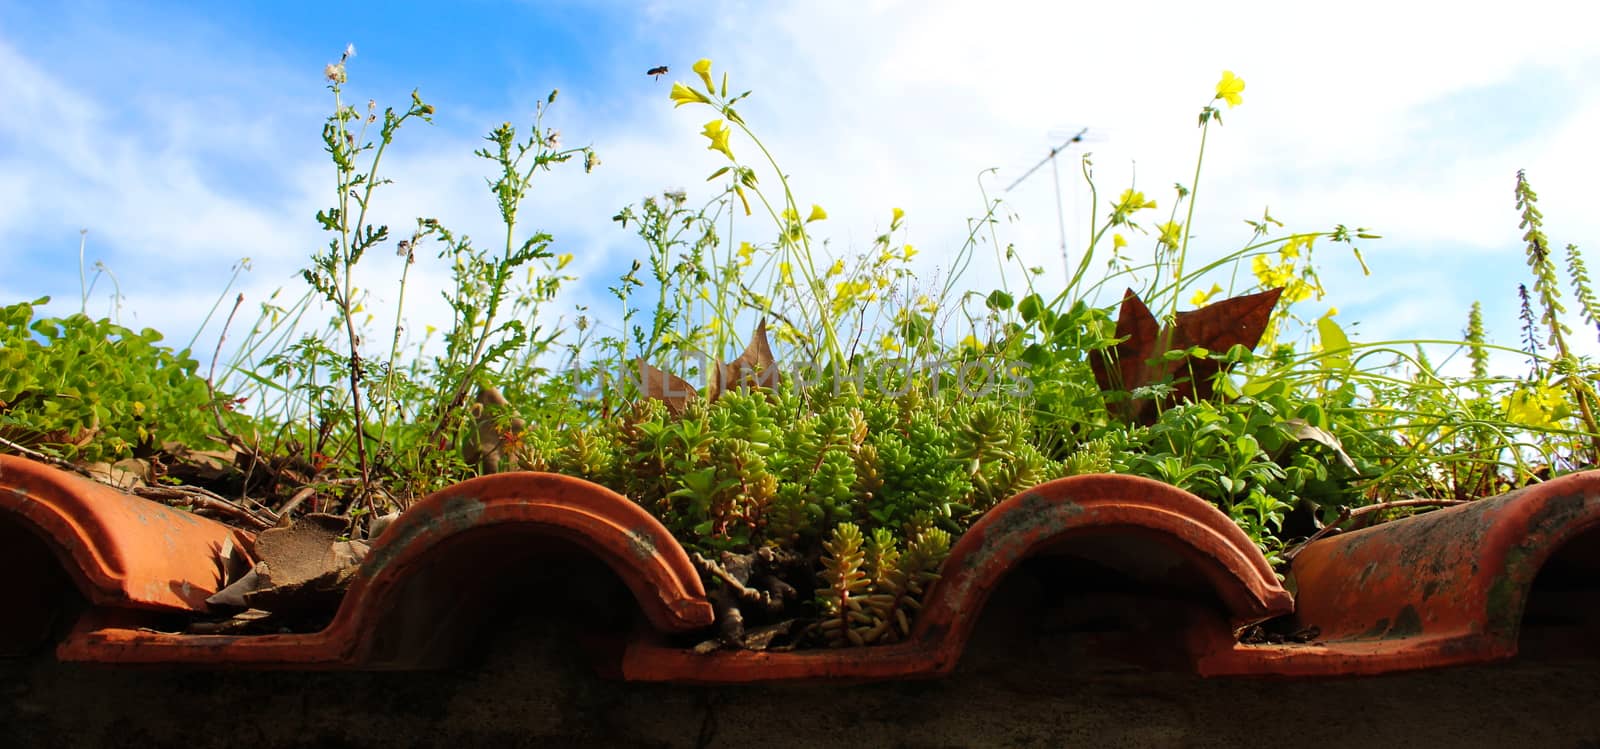 A game of nature on an old roof. An ecosystem has been established on the old roof of the old building. A beautiful scene with plants, dry leaves, a bee and plant debris. by mahirrov